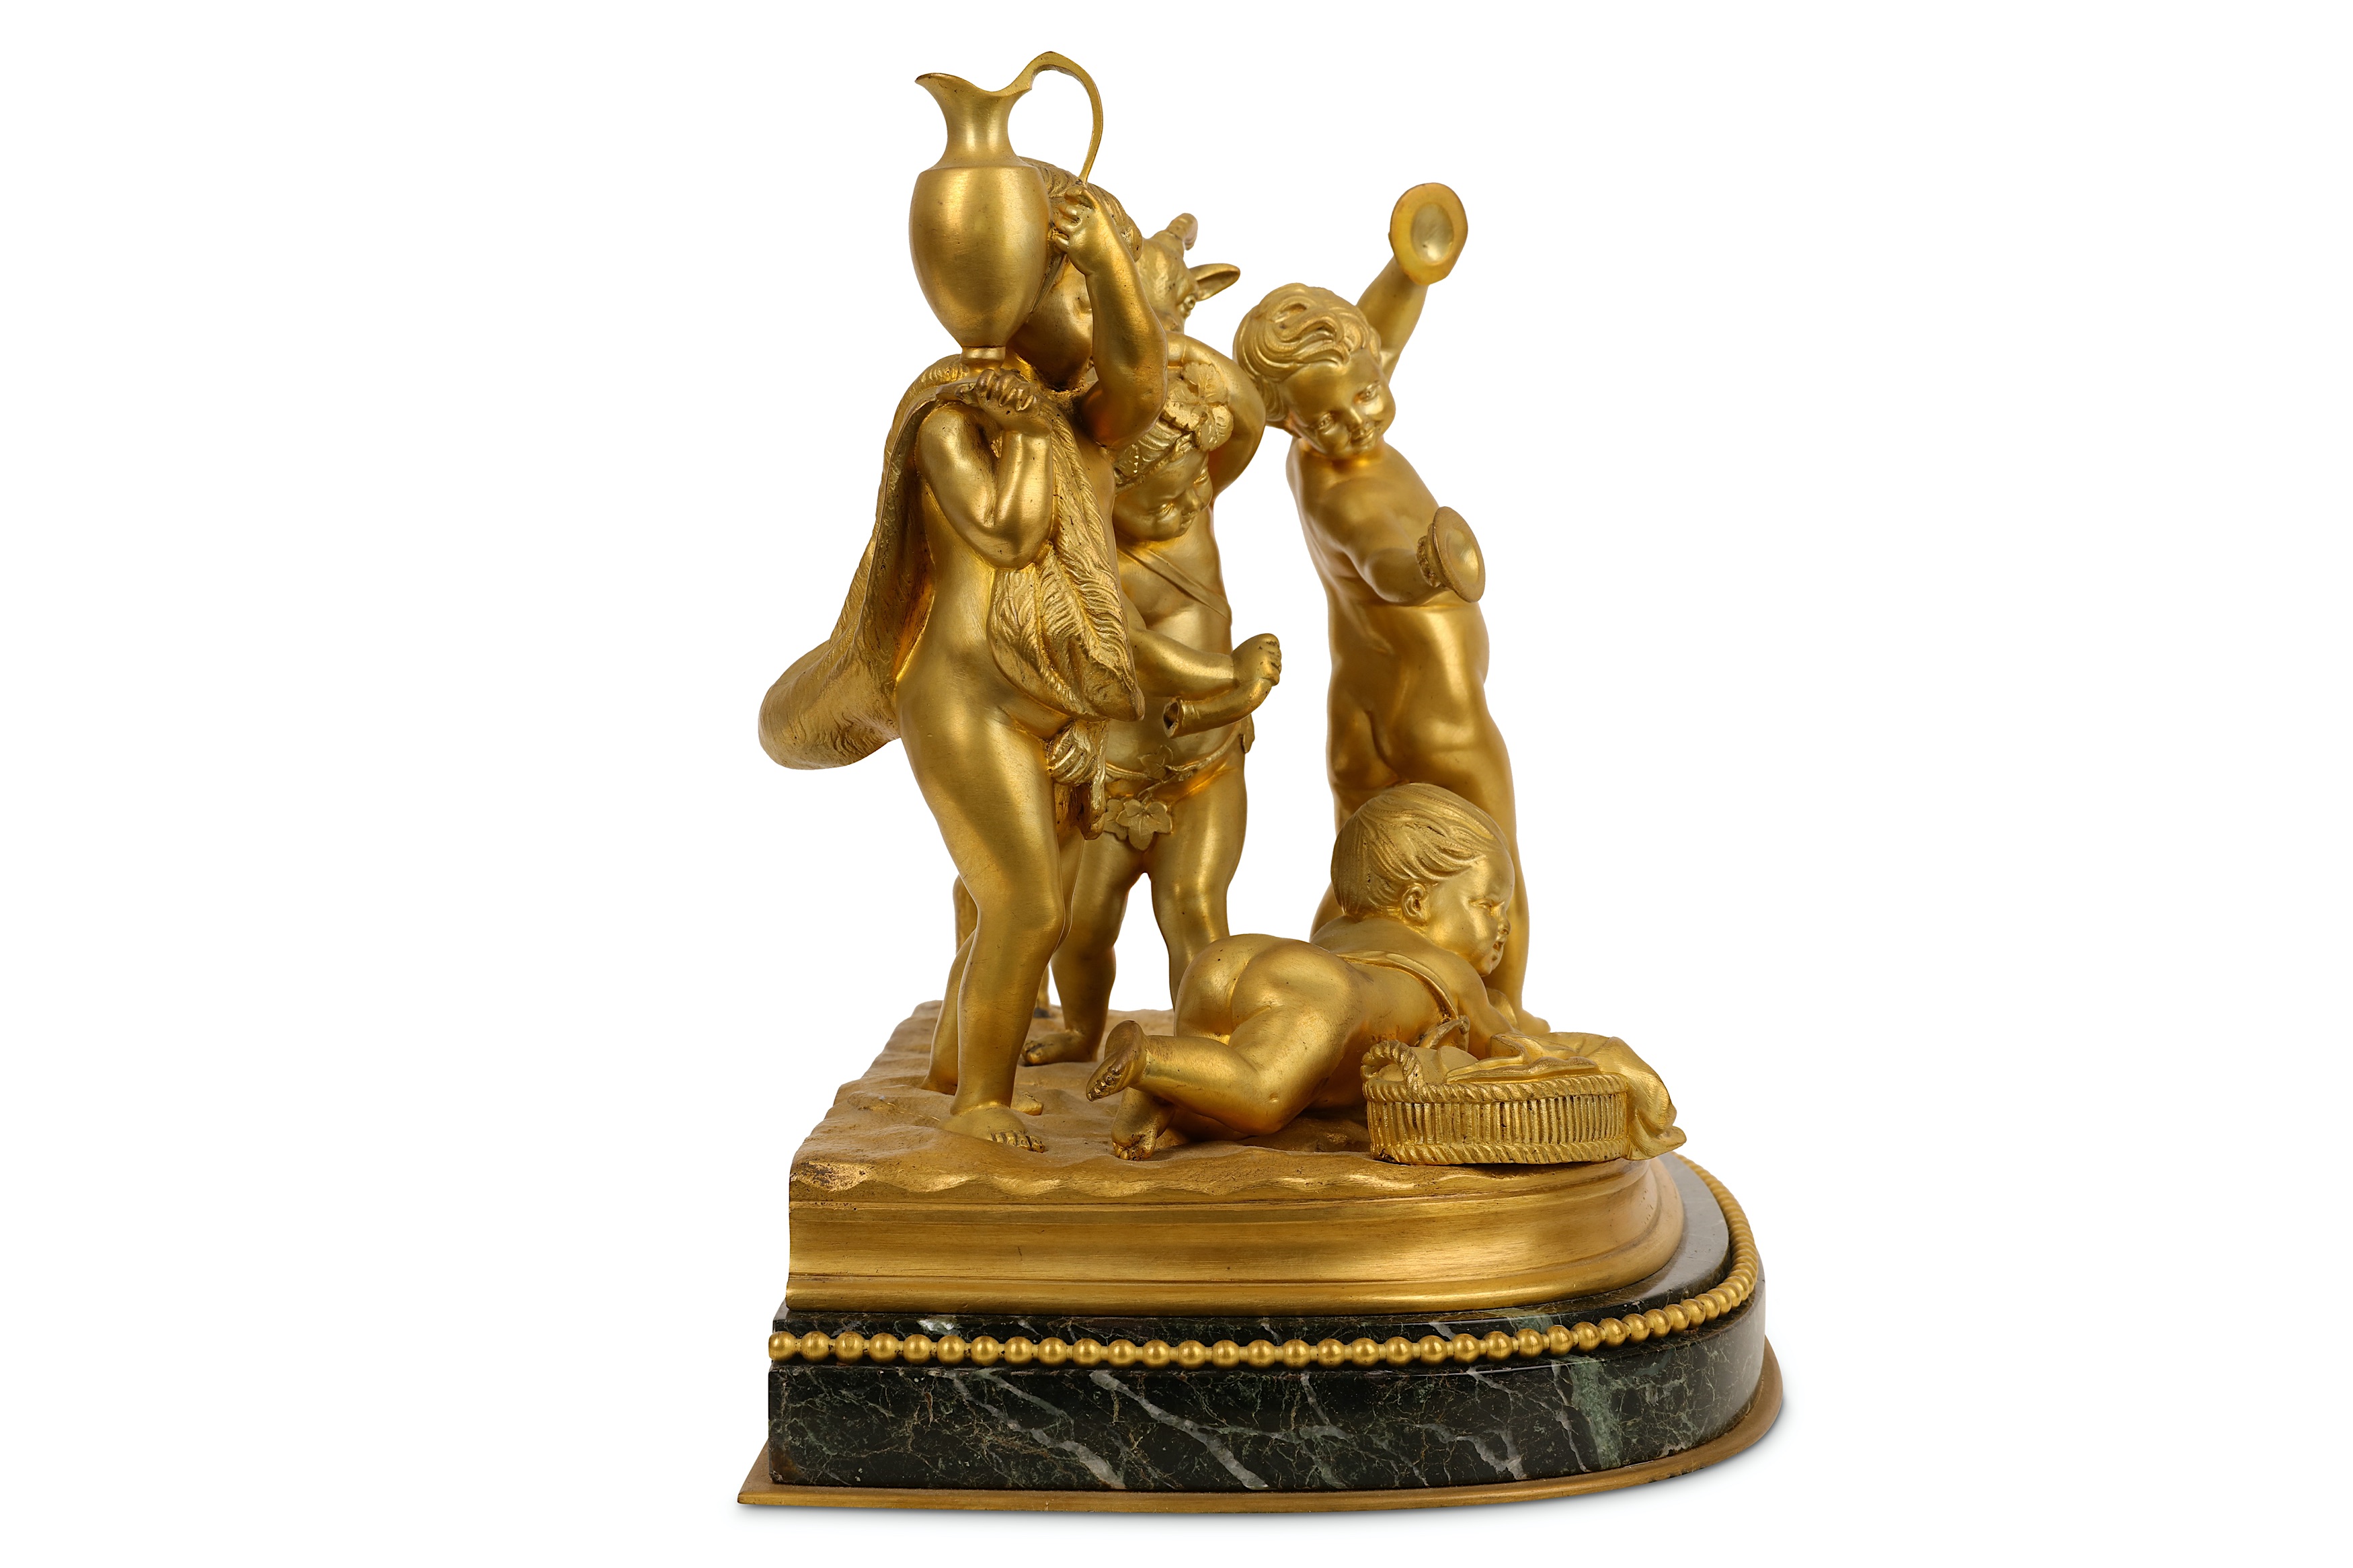 A FINE LATE 19TH CENTURY FRENCH GILT BRONZE FIGURAL GROUP OF PUTTI AND A GOAT SIGNED 'SEVRES' with - Image 4 of 5